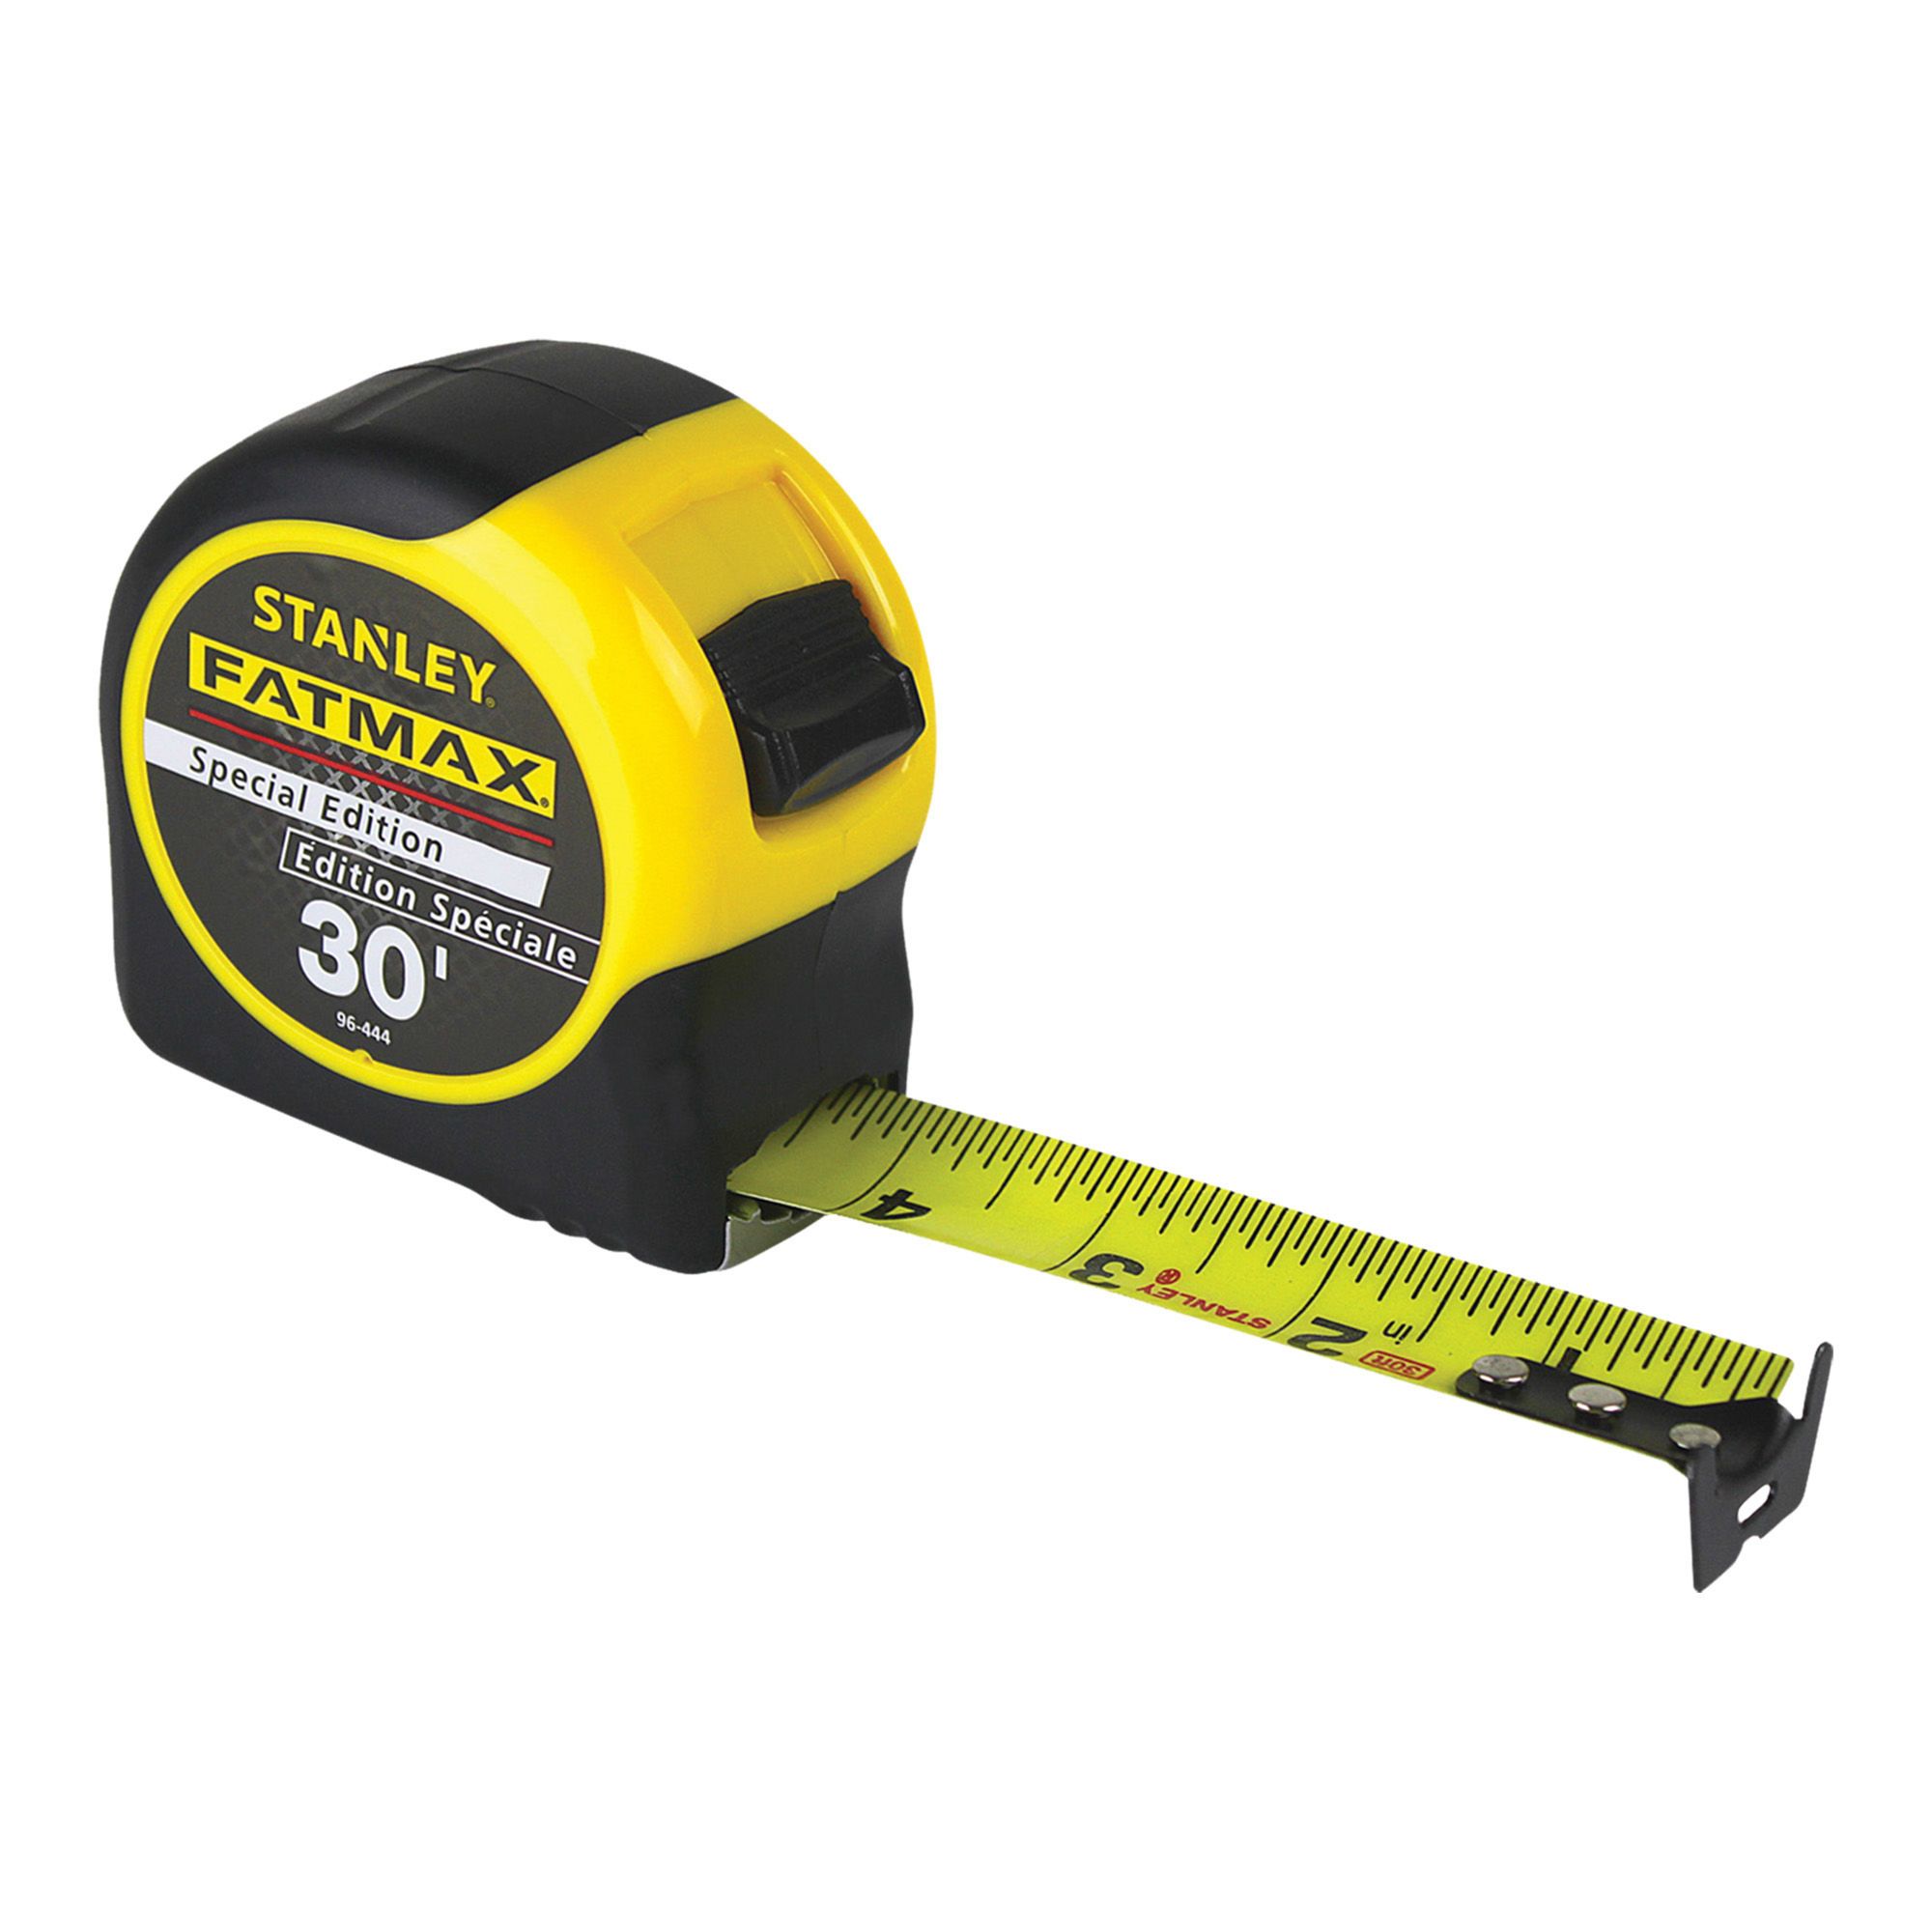 FatMax Special Edition measuring tape from STANLEY